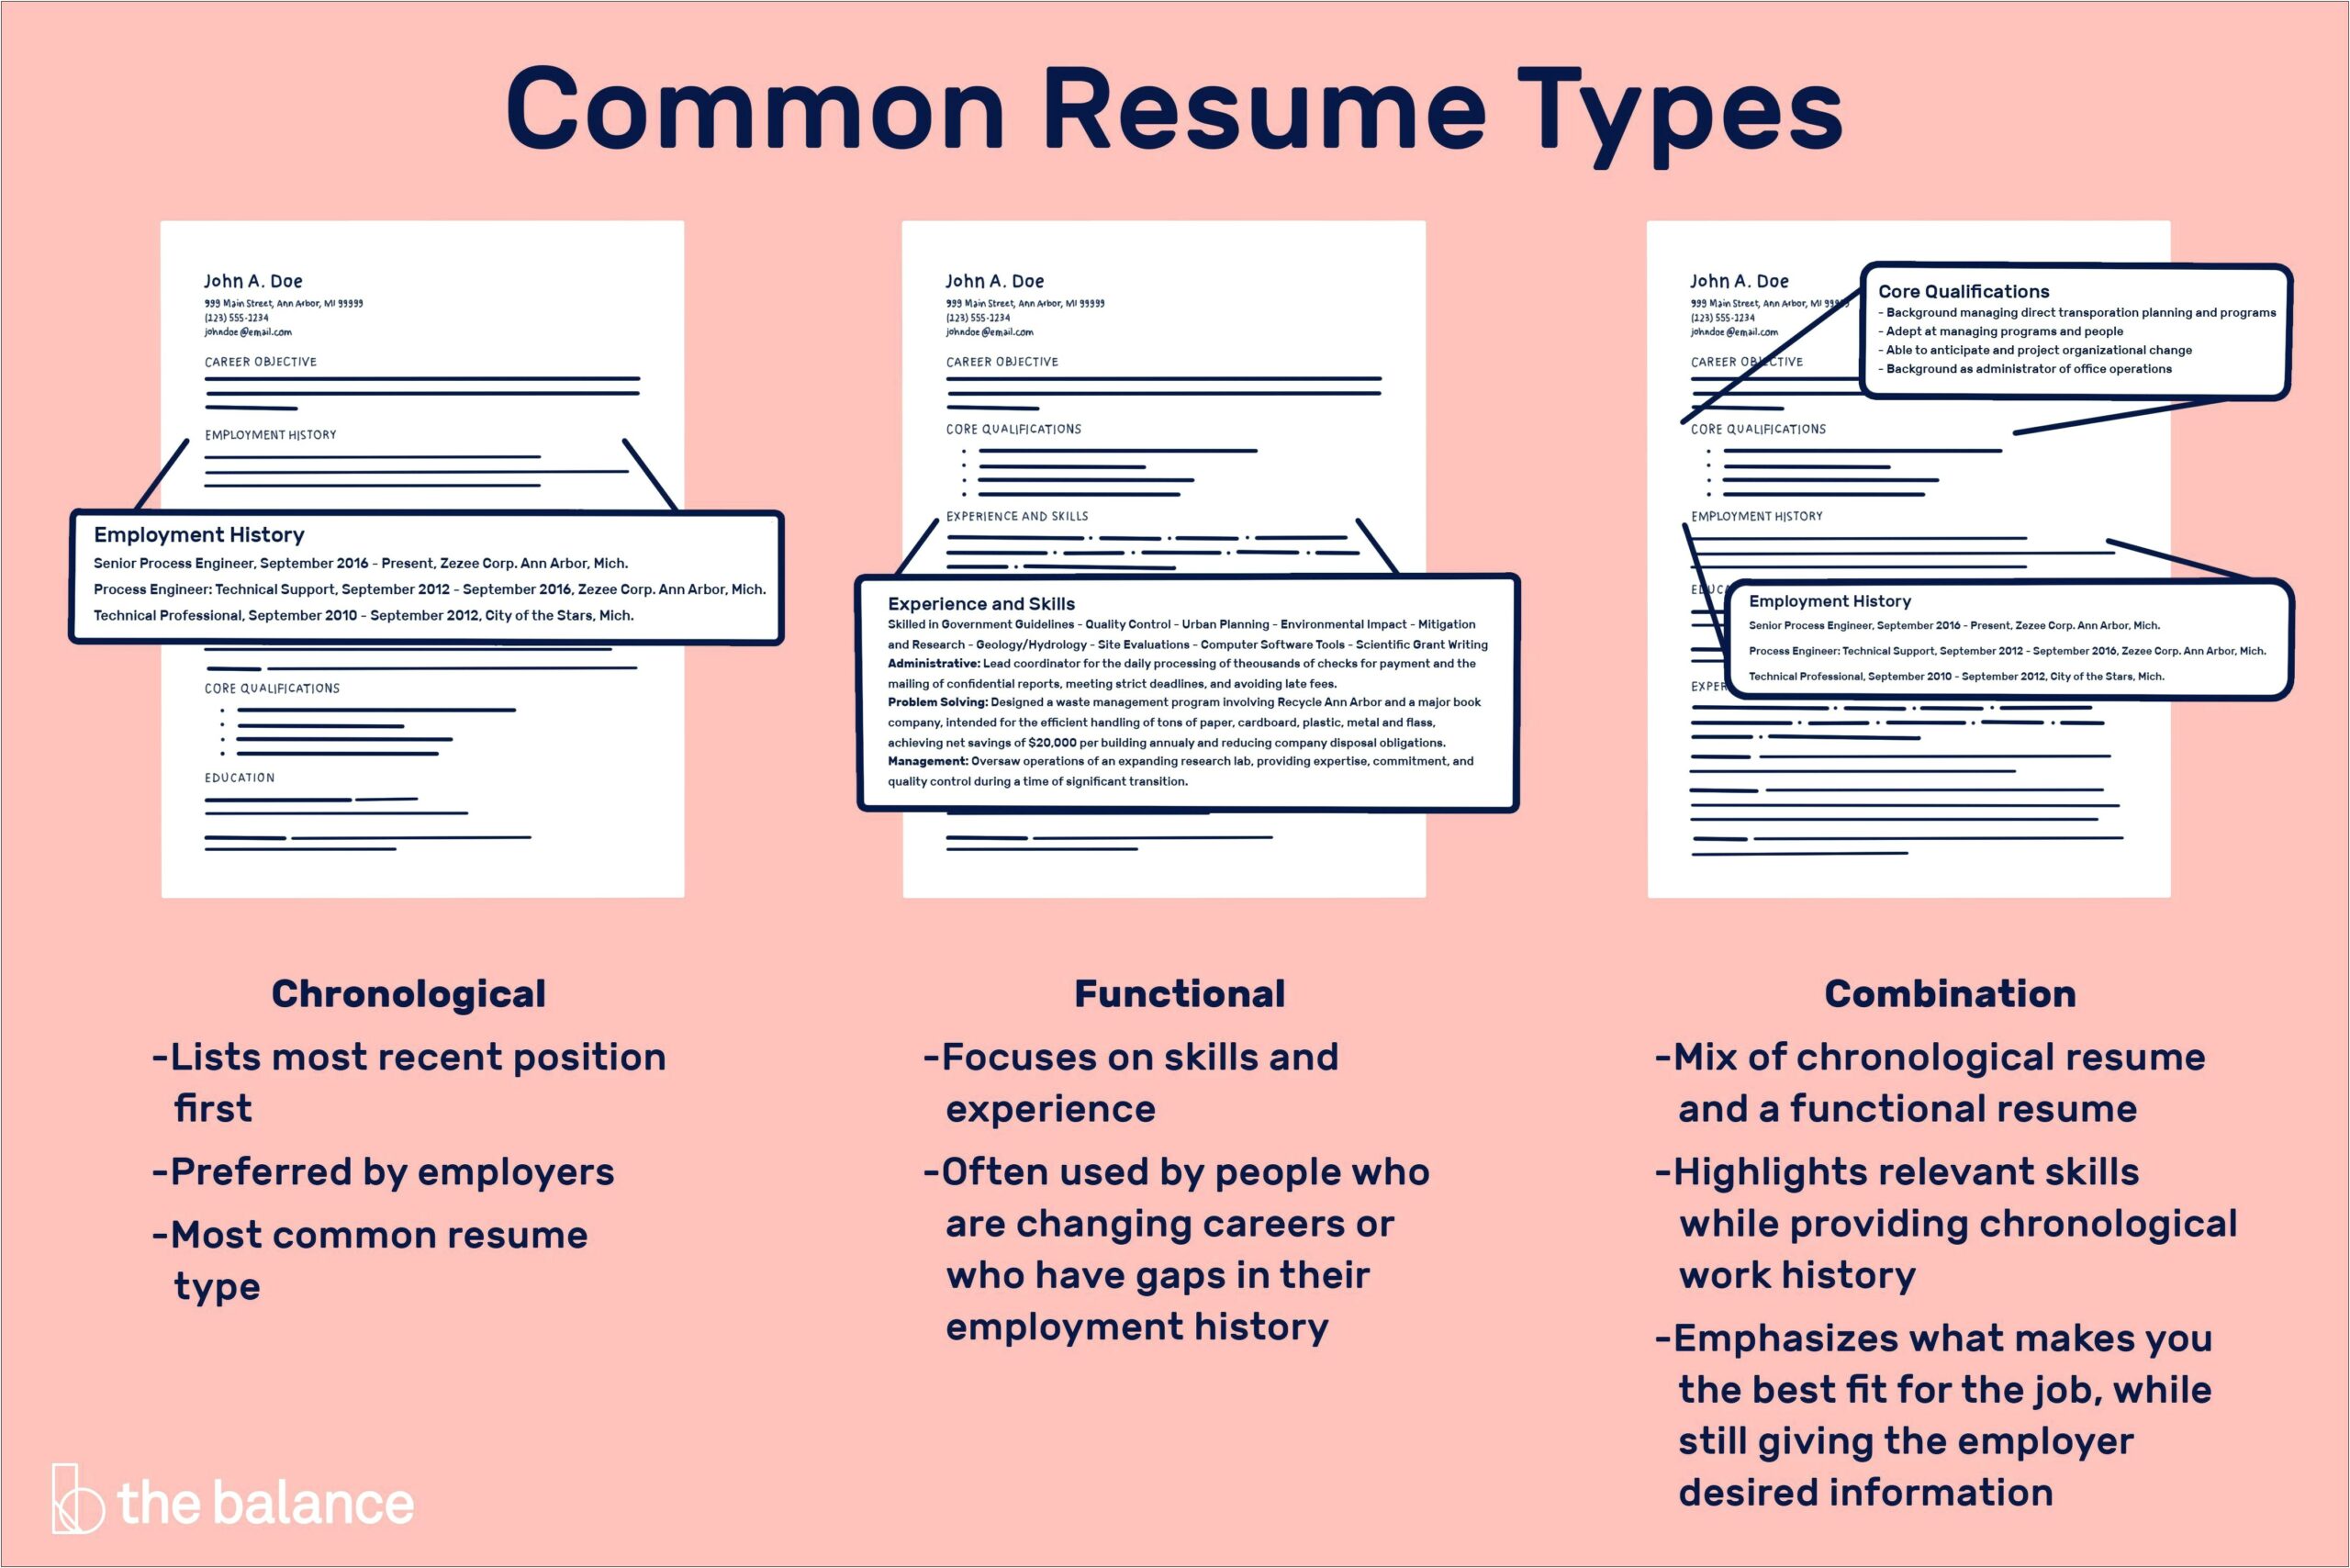 Functional Resume Skills And Abilities